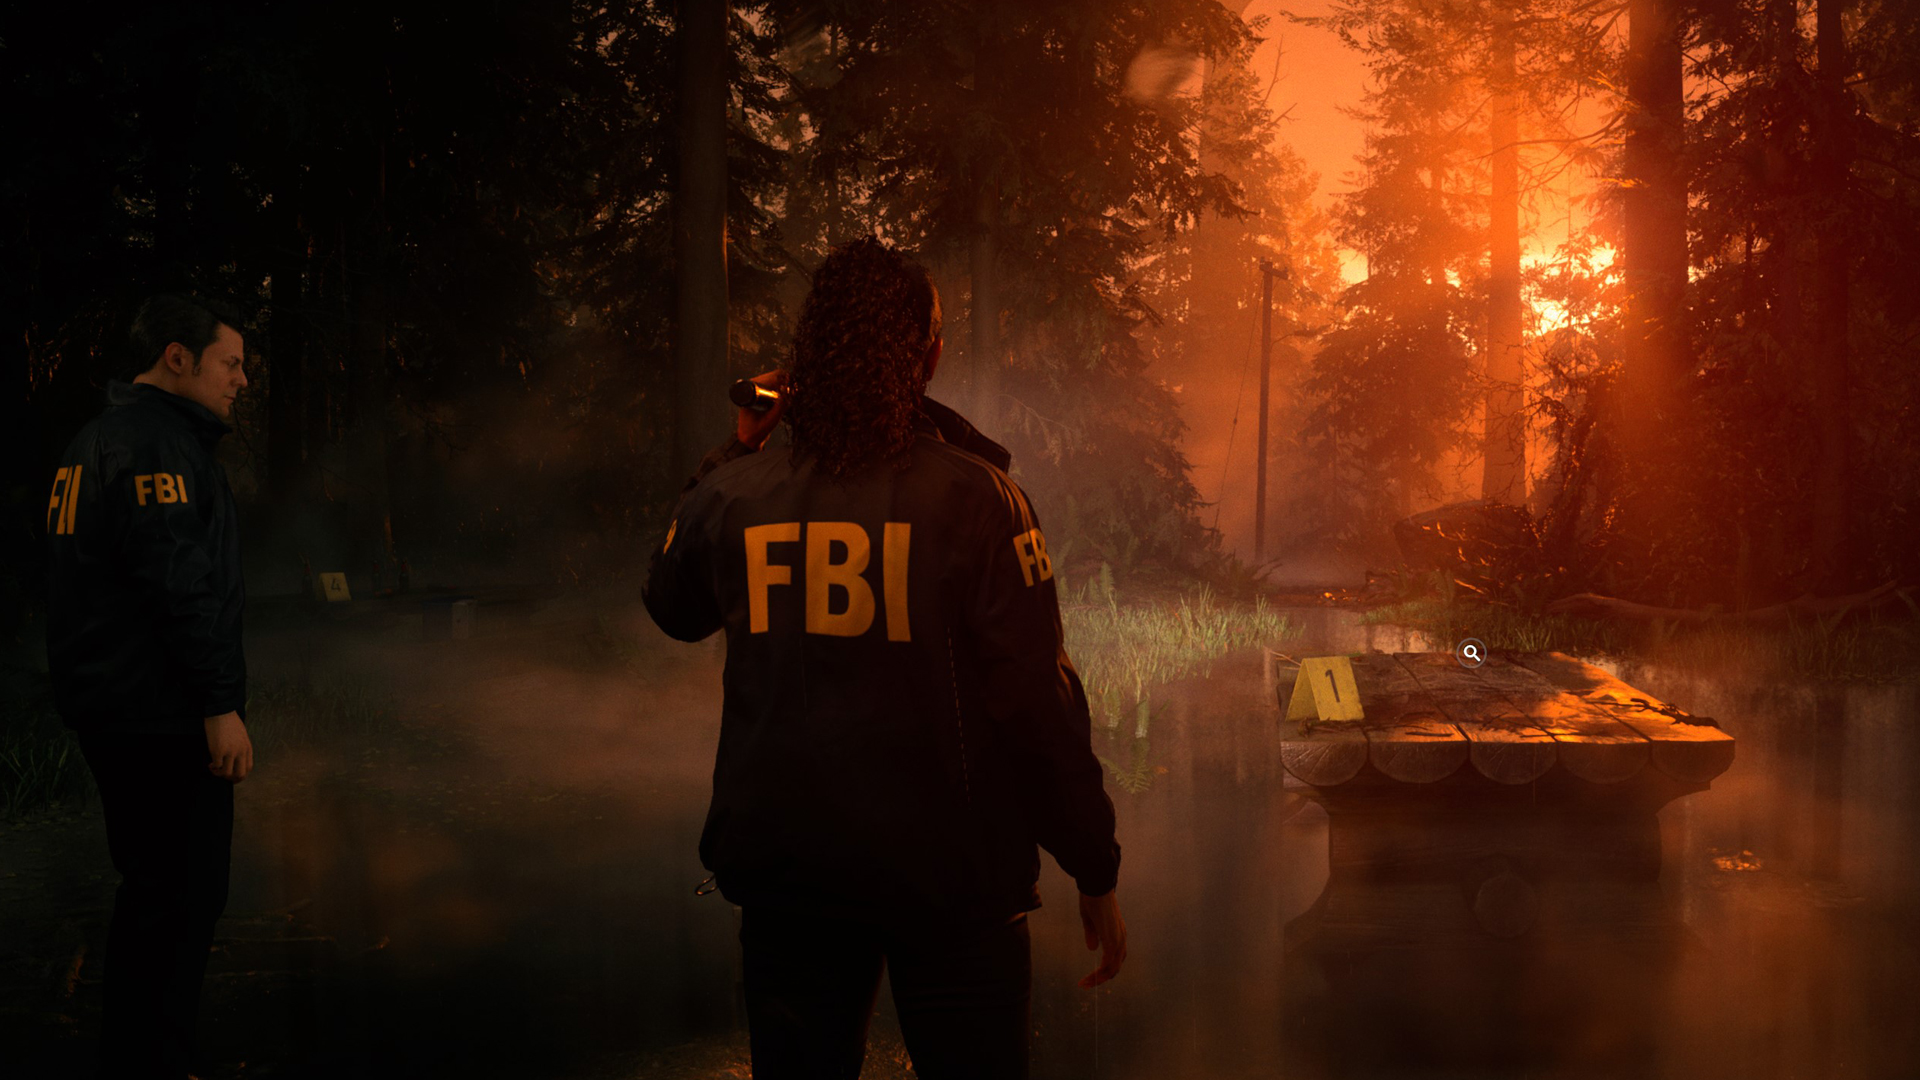 Alan Wake 2 system requirements: PC specs - Dot Esports